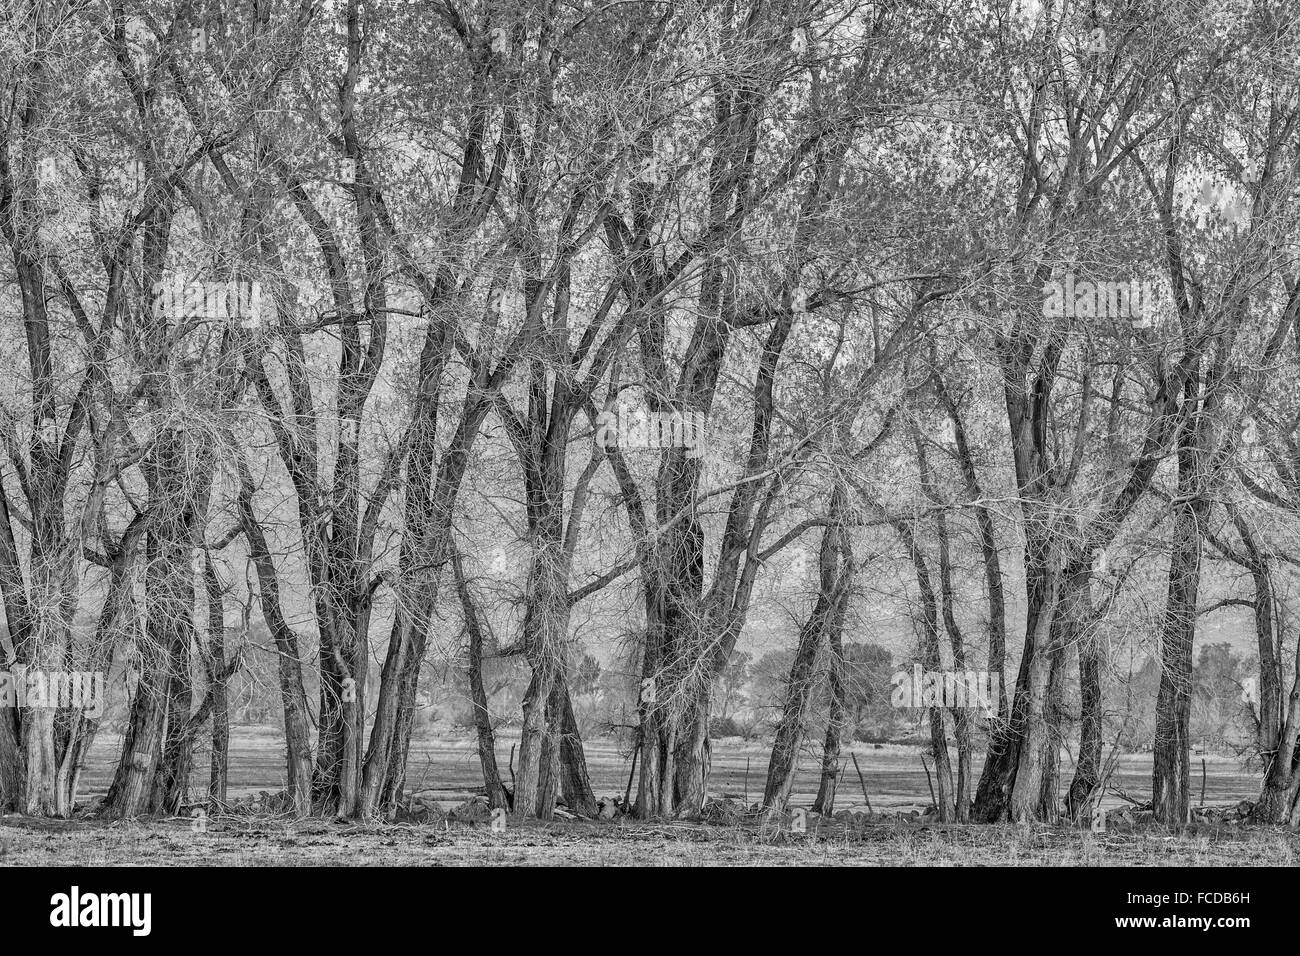 Trees boardering range land in Owens Valley, California Stock Photo